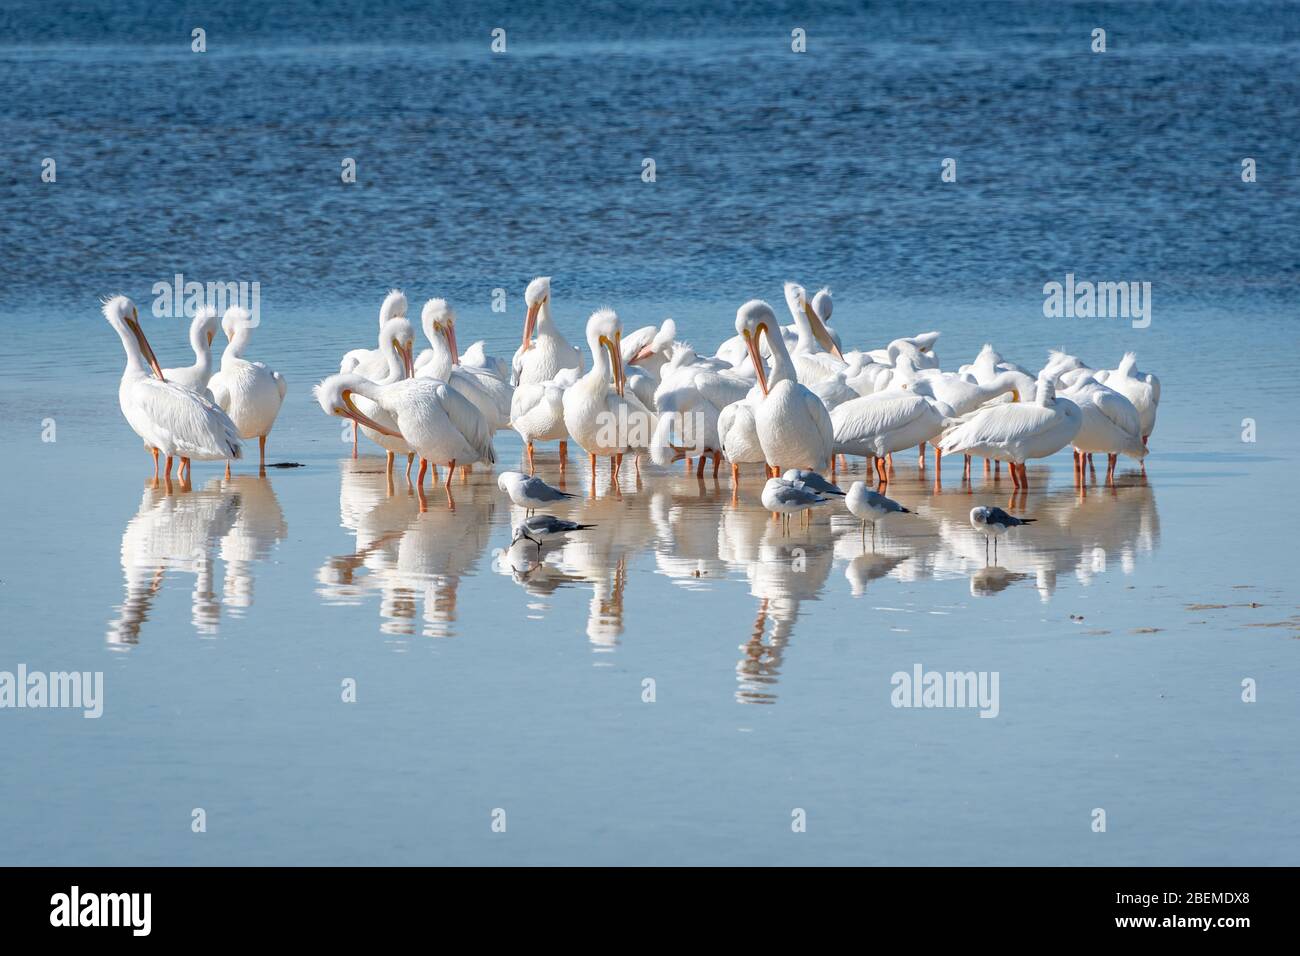 Group of white pelicans preening feathers in shallow water with reflections. Ding Darling Wildife Refuge, Sanibel Island, western Florida in winter. Stock Photo